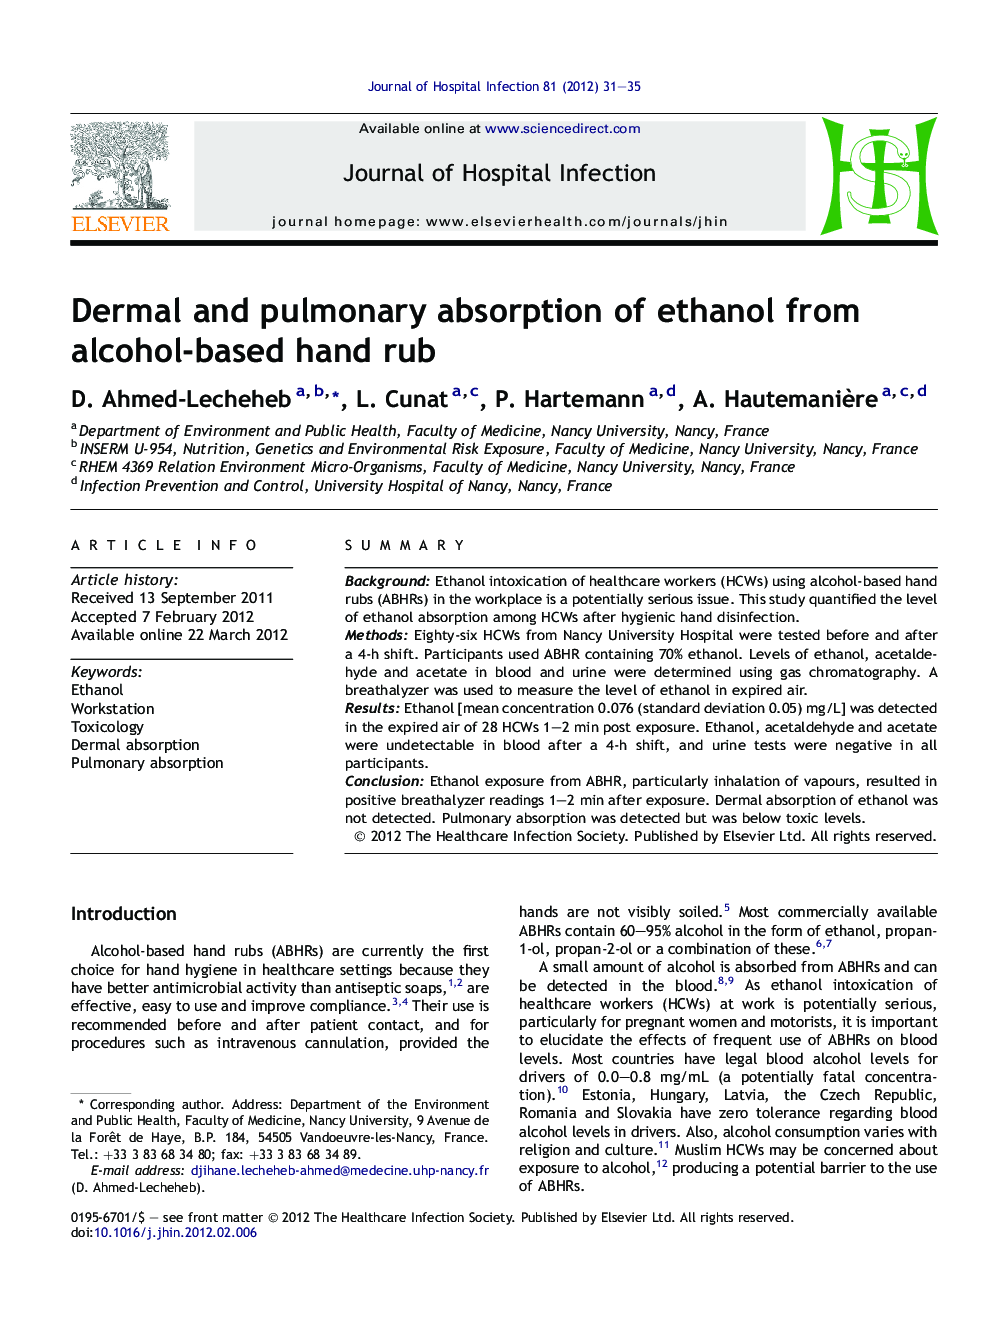 Dermal and pulmonary absorption of ethanol from alcohol-based hand rub